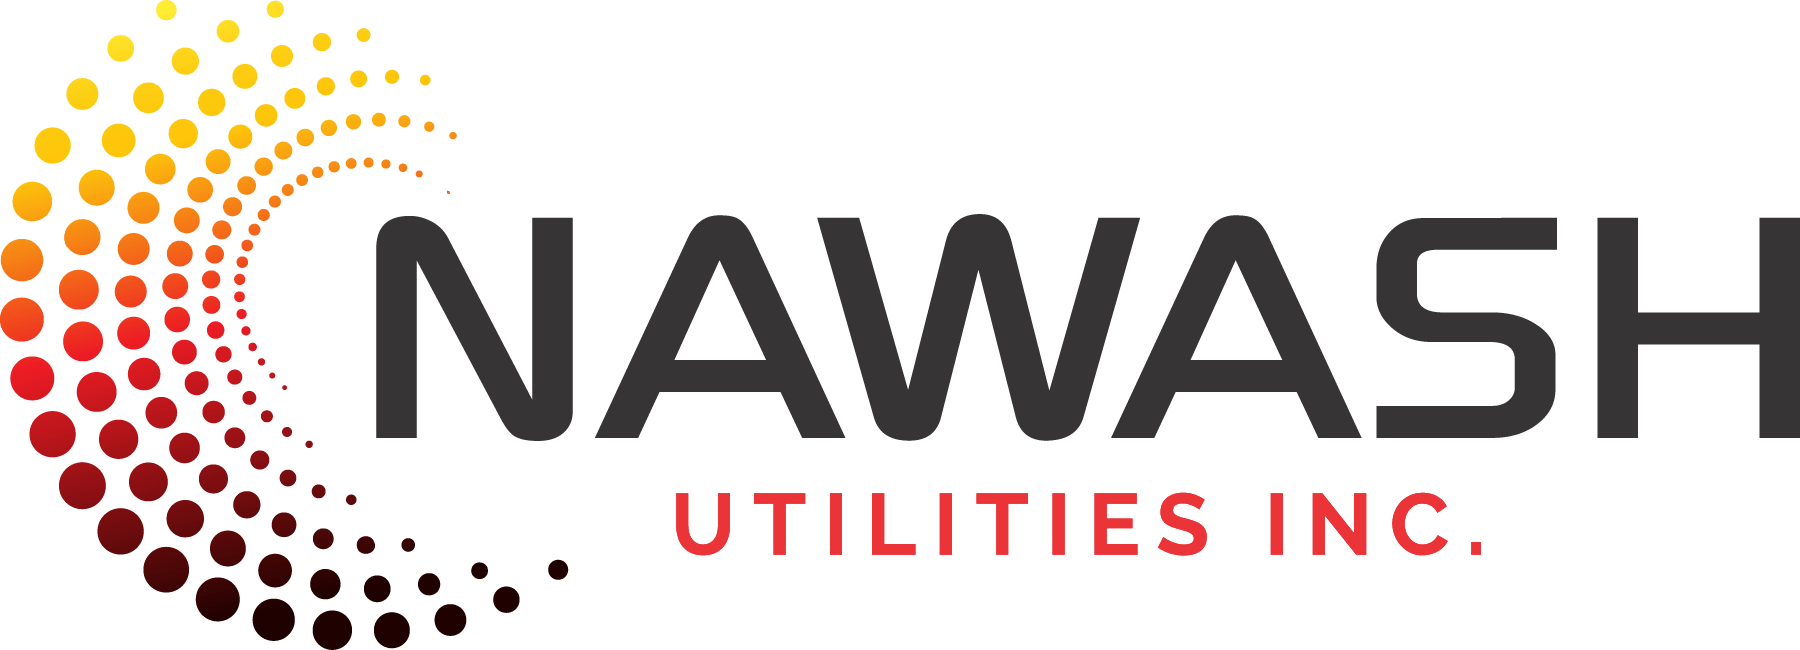 The image features a logo with the text "NAWASH UTILITIES INC." beside a dotted swirl design transitioning from yellow to dark red on a green background.